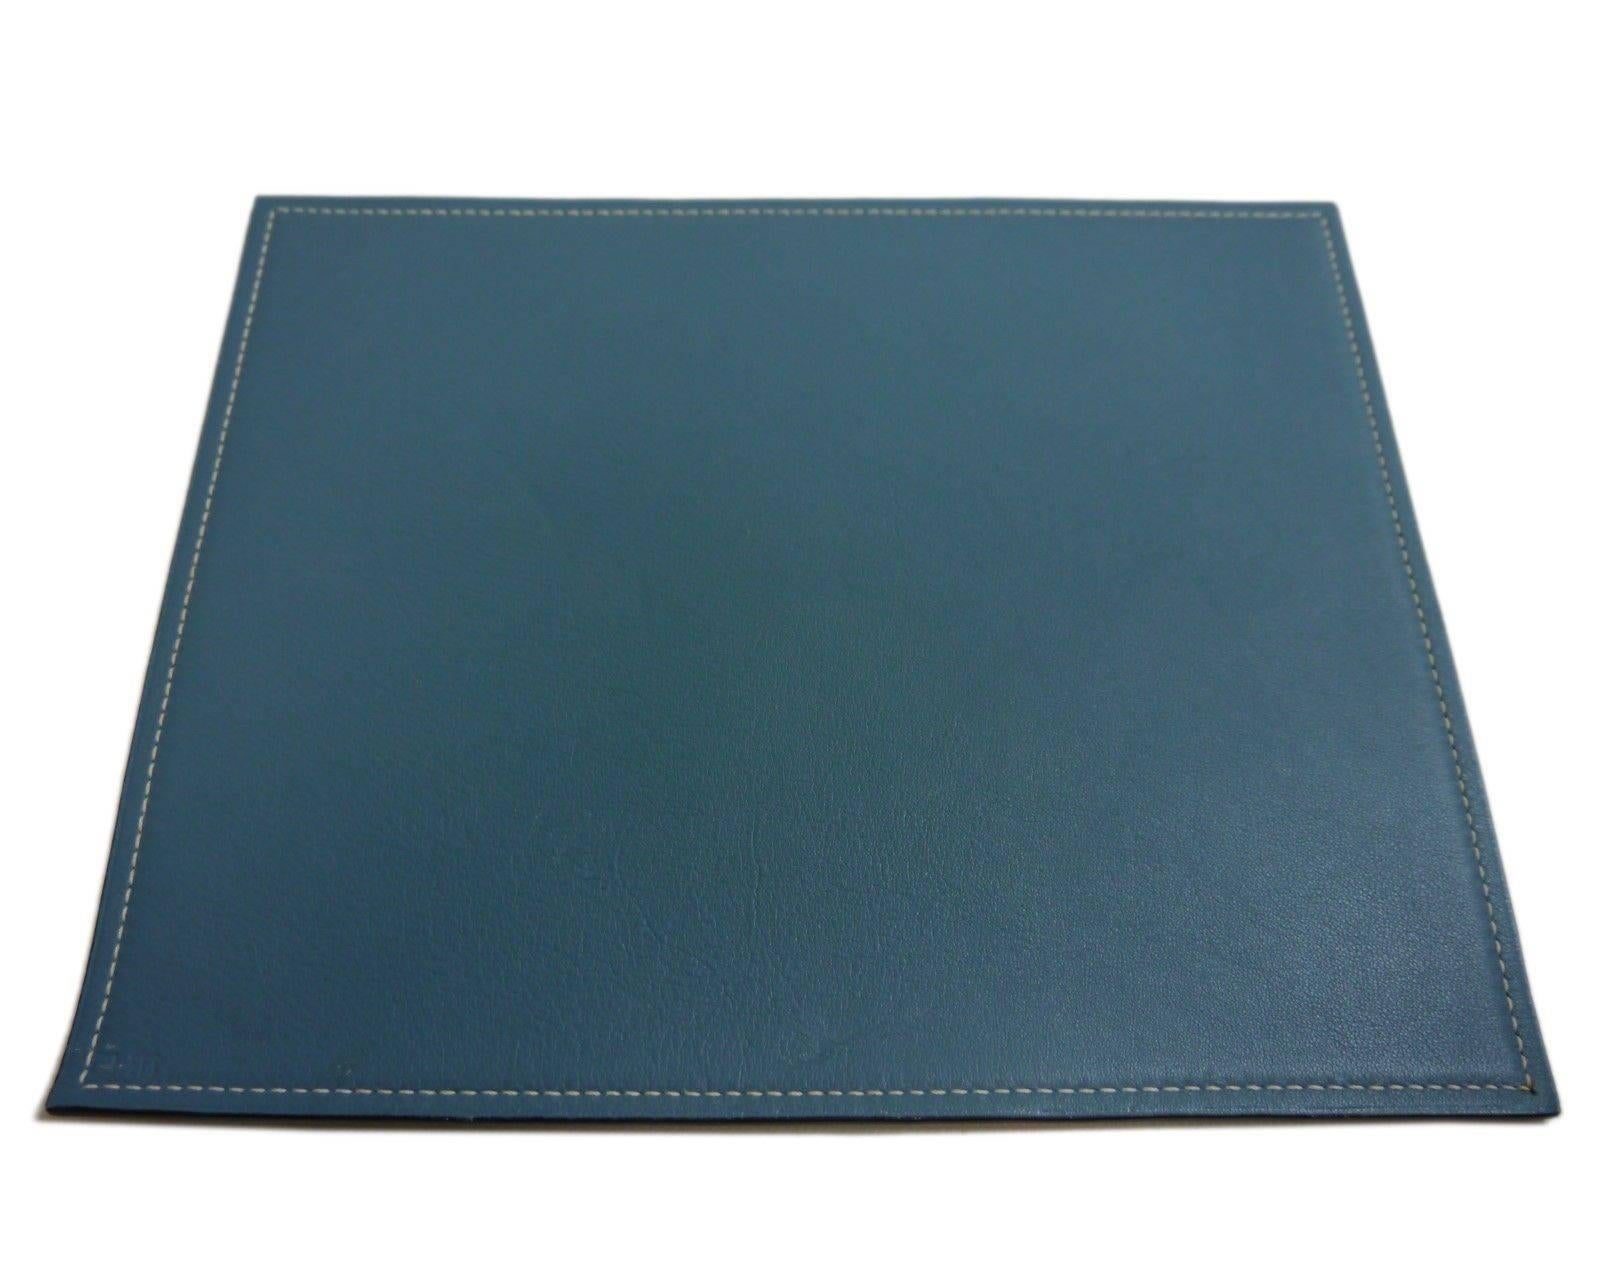 Hermes NEW Black Blue Leather Men's Women's Miscellaneous Gift Desk Table Pad in Box

Leather
Date code present
Made in France
Measures 9